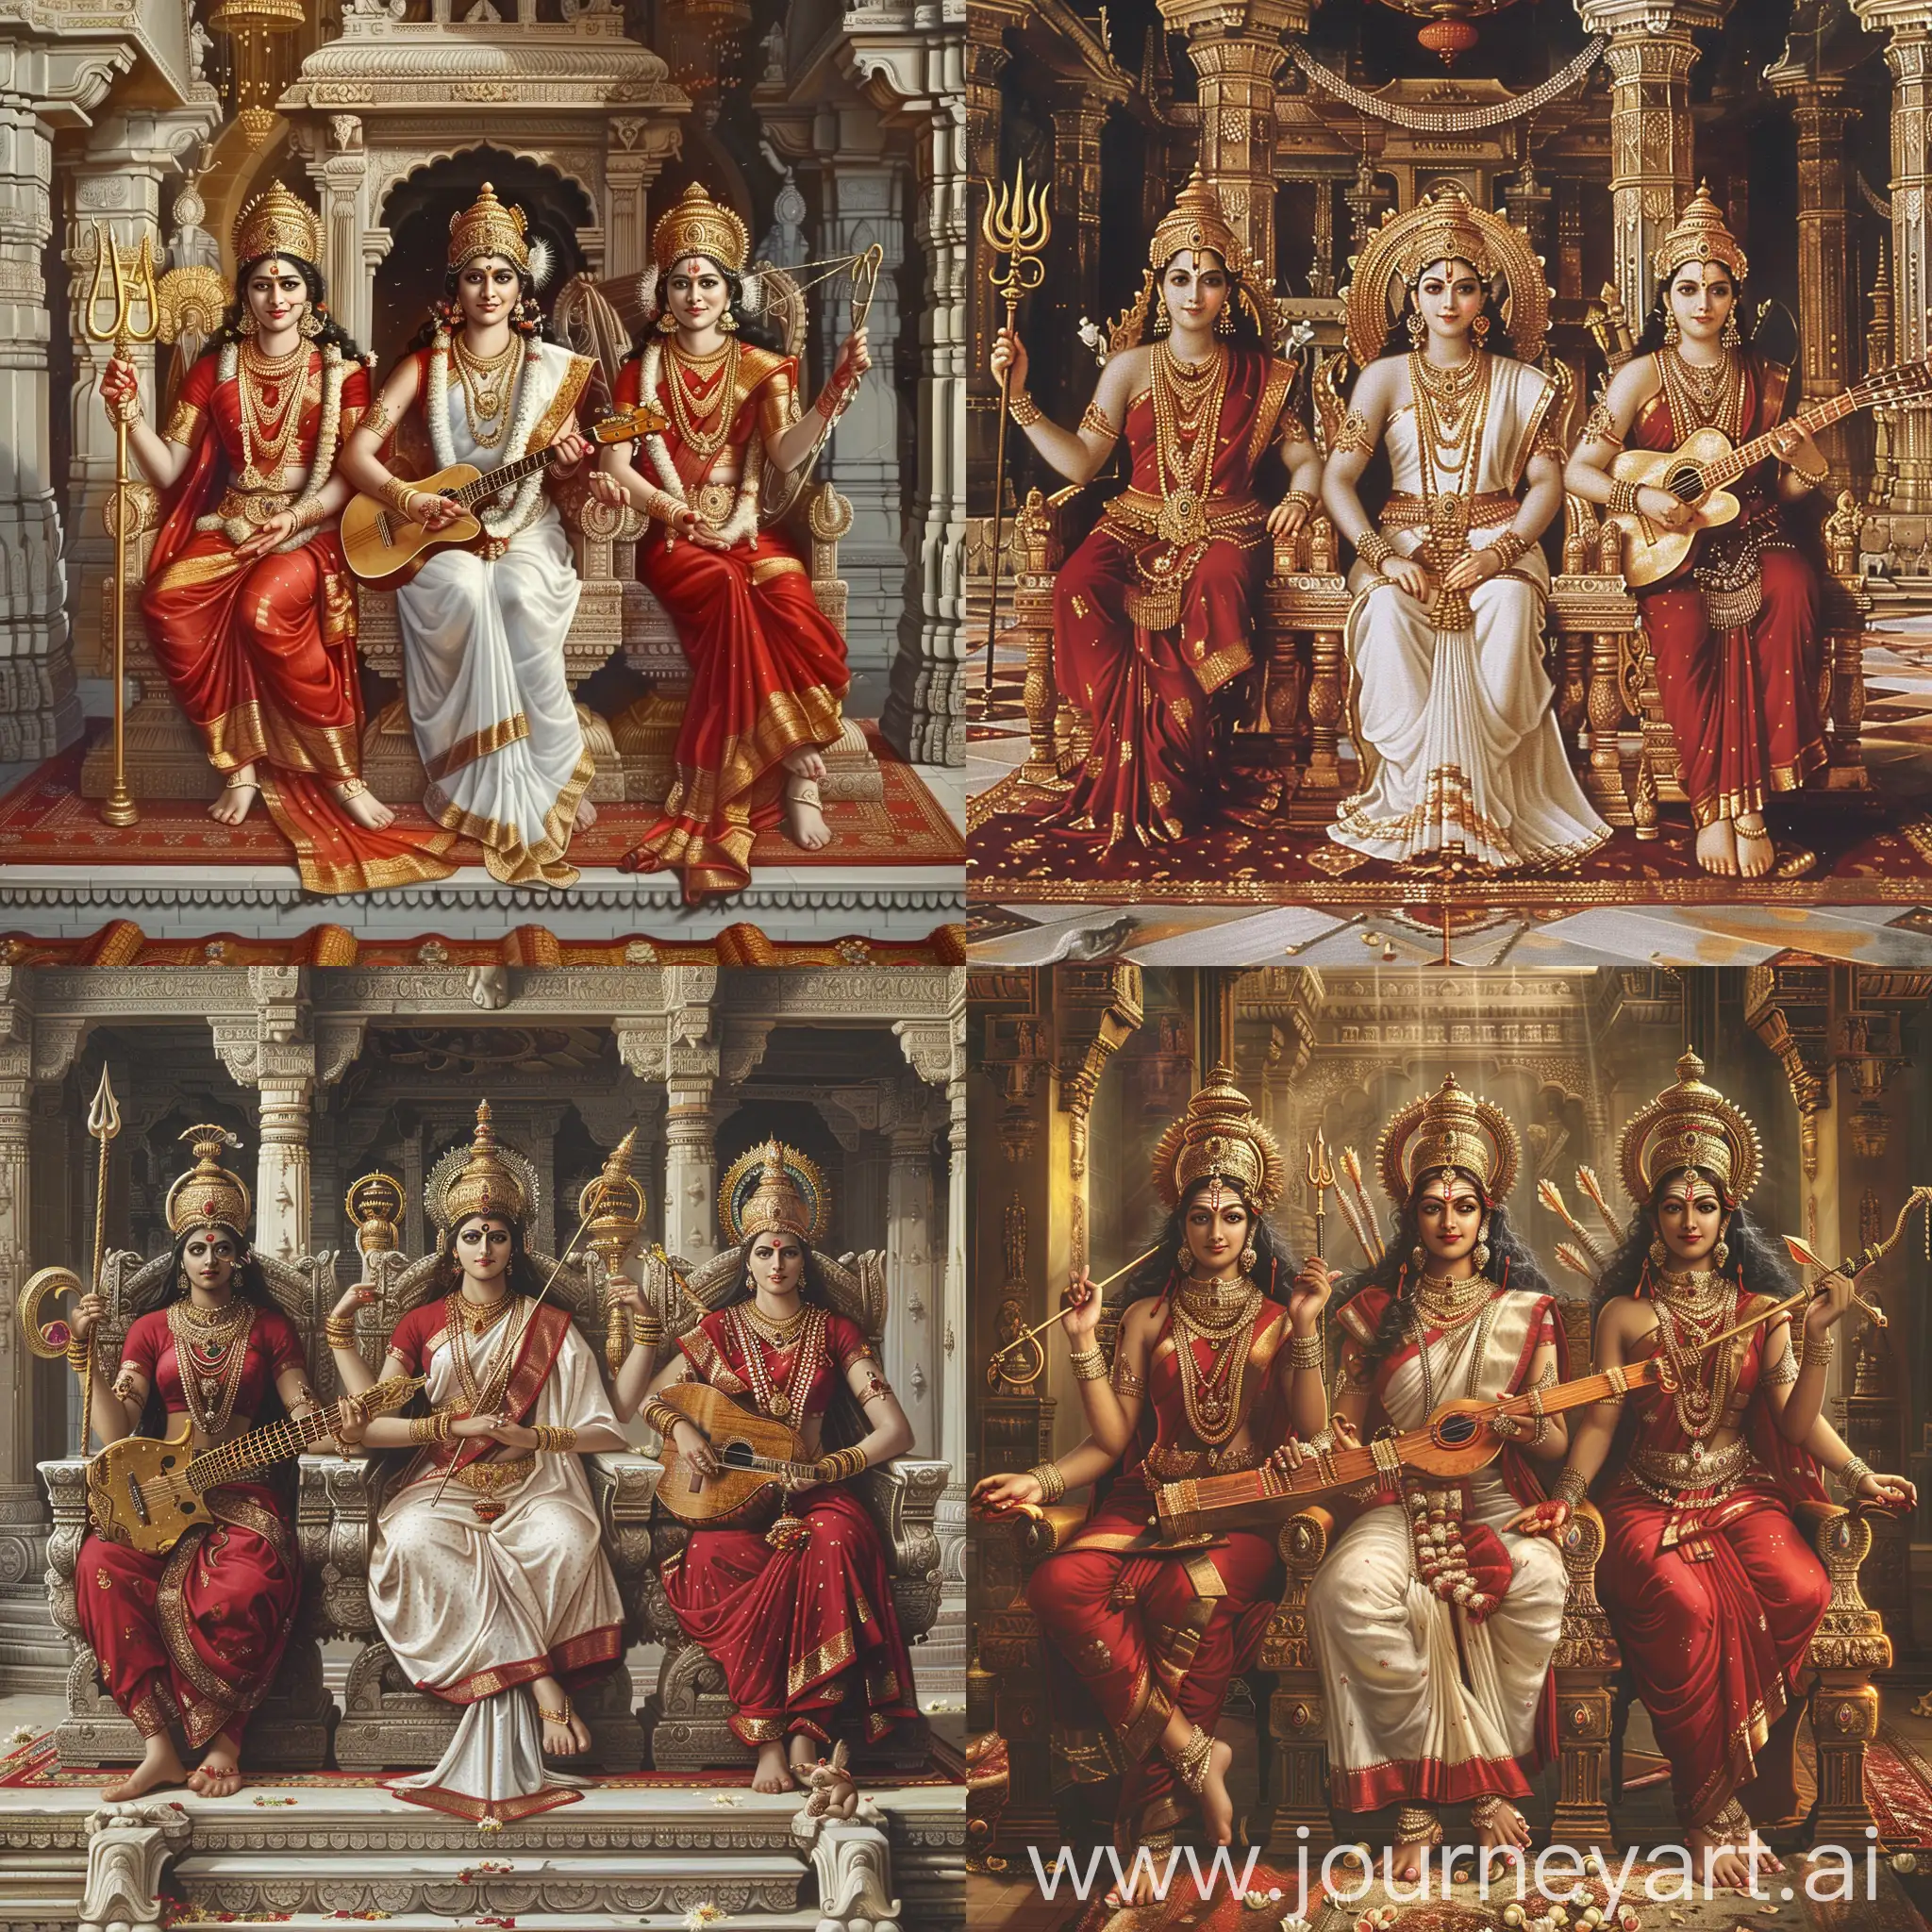 Tridevi : three Hindu goddesses are sitting on their thrones,

the first left one is Parvati who wears red clothes and holds a golden trident in hands,

the second middle one is Saraswati who wears white clothes and holds an ancient Indian guitar in hands,

the third right one is Lakshmi who wears red clothes and holds a golden bow and arrow in hands,

they are all inside a splendid hindu temple,